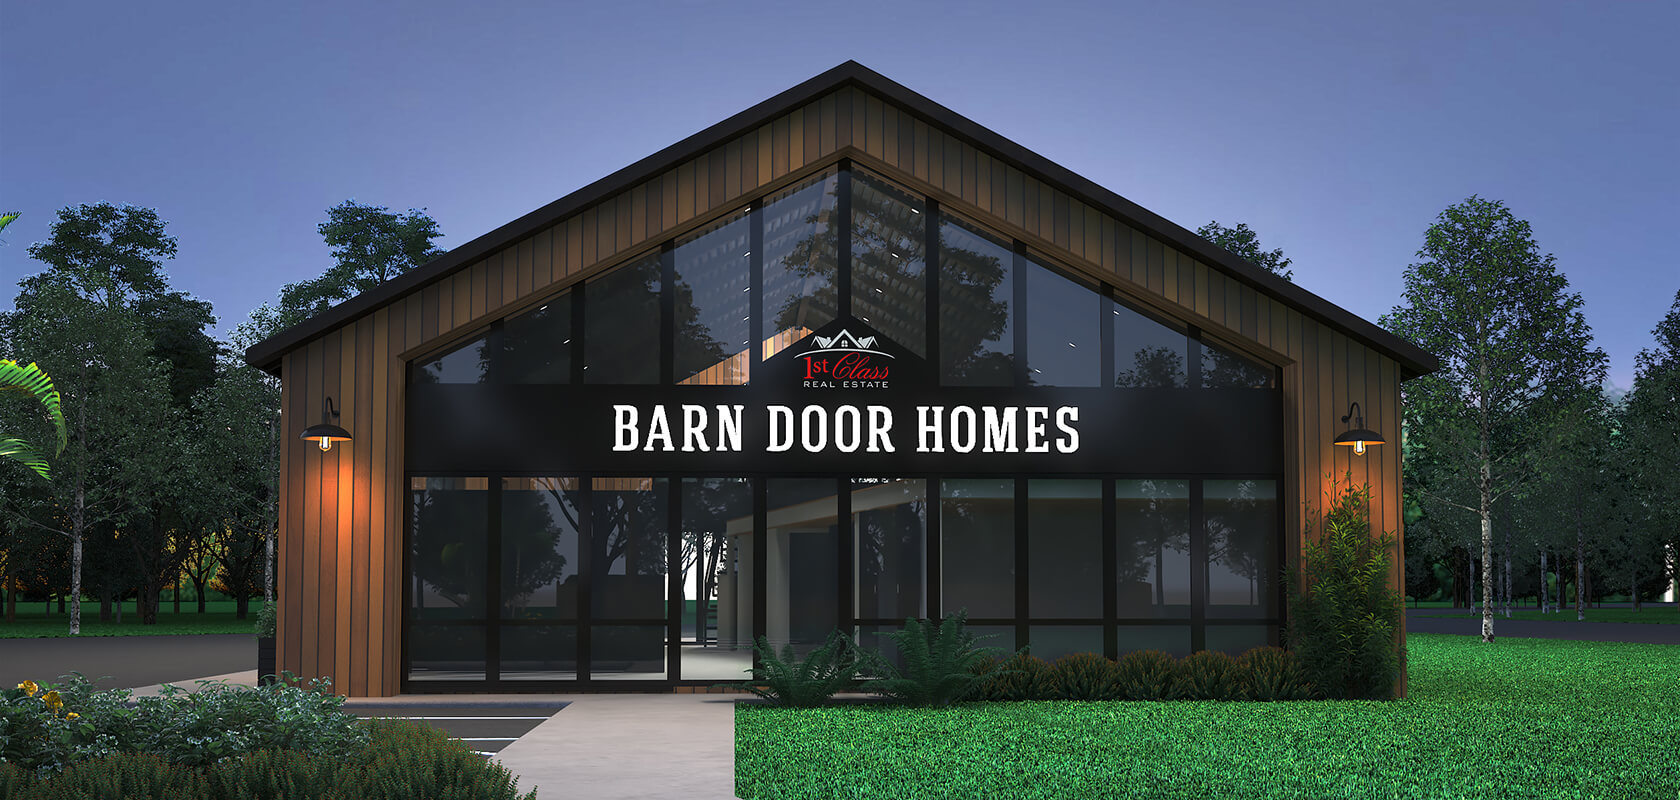 Barndoor Homes Architectural Project